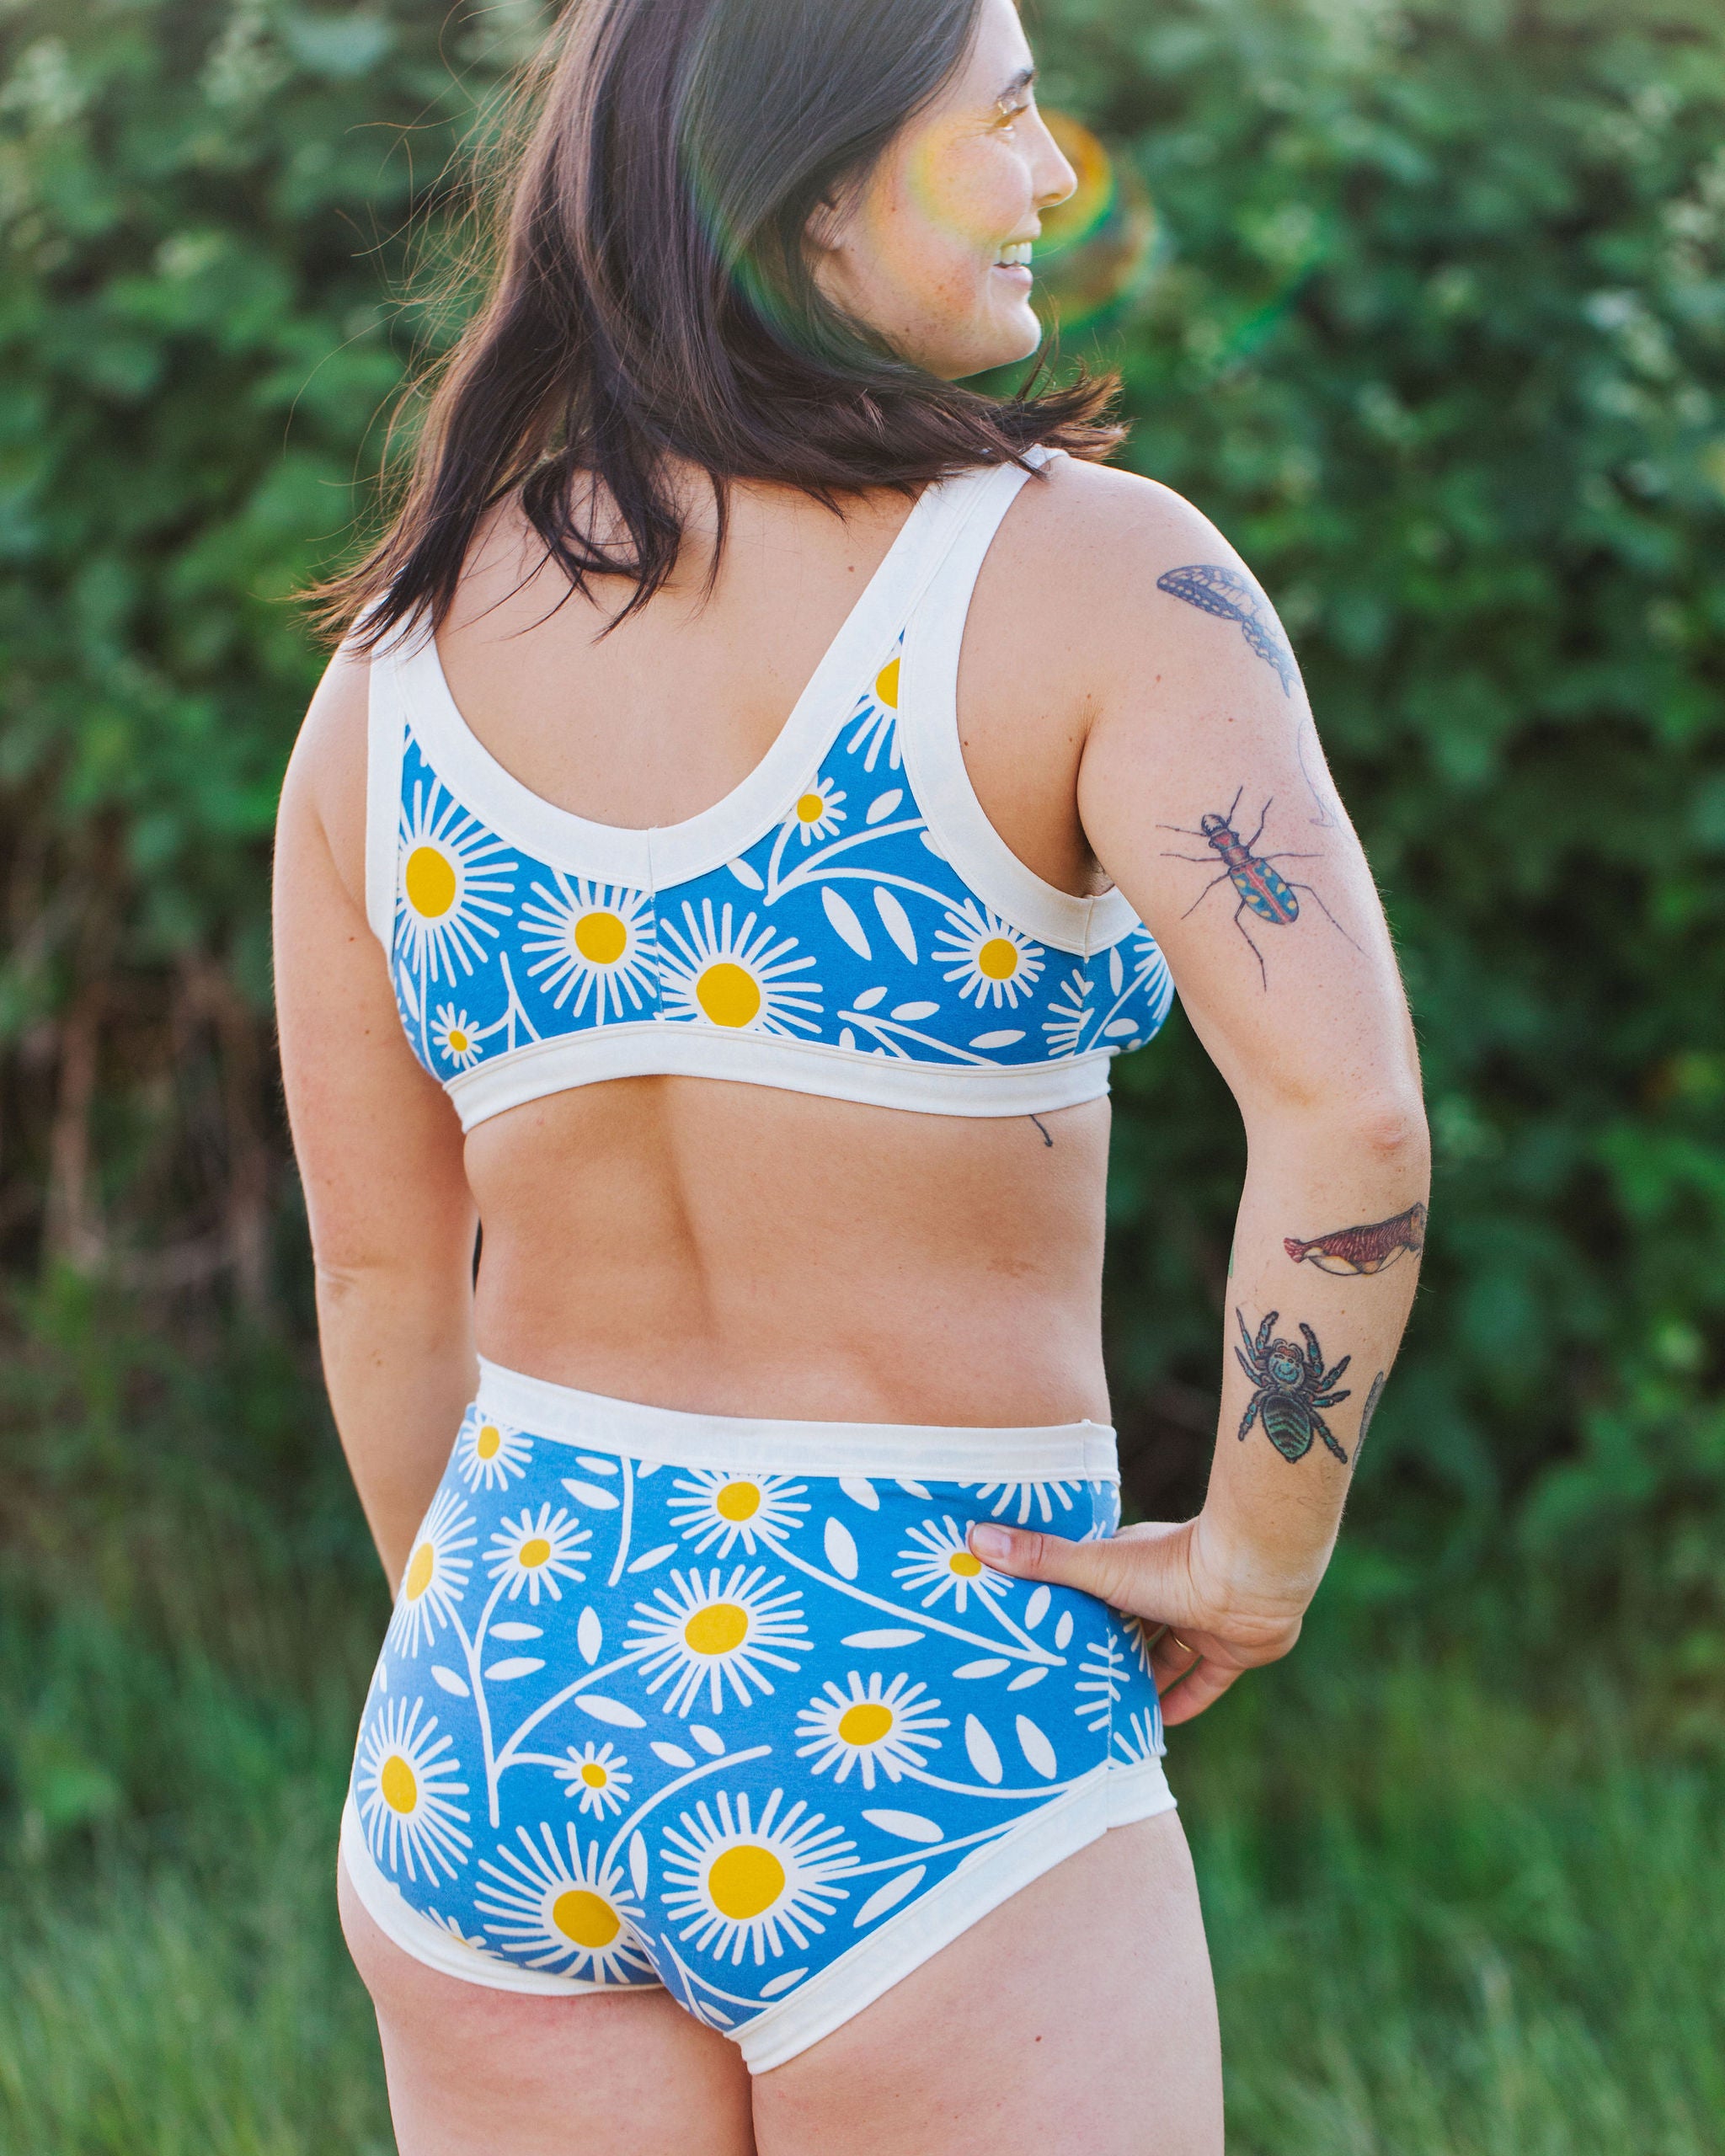 Close up of model wearing Thunderpants Bralette and Original style underwear in Daisy Days print: blue with white and yellow daisies.